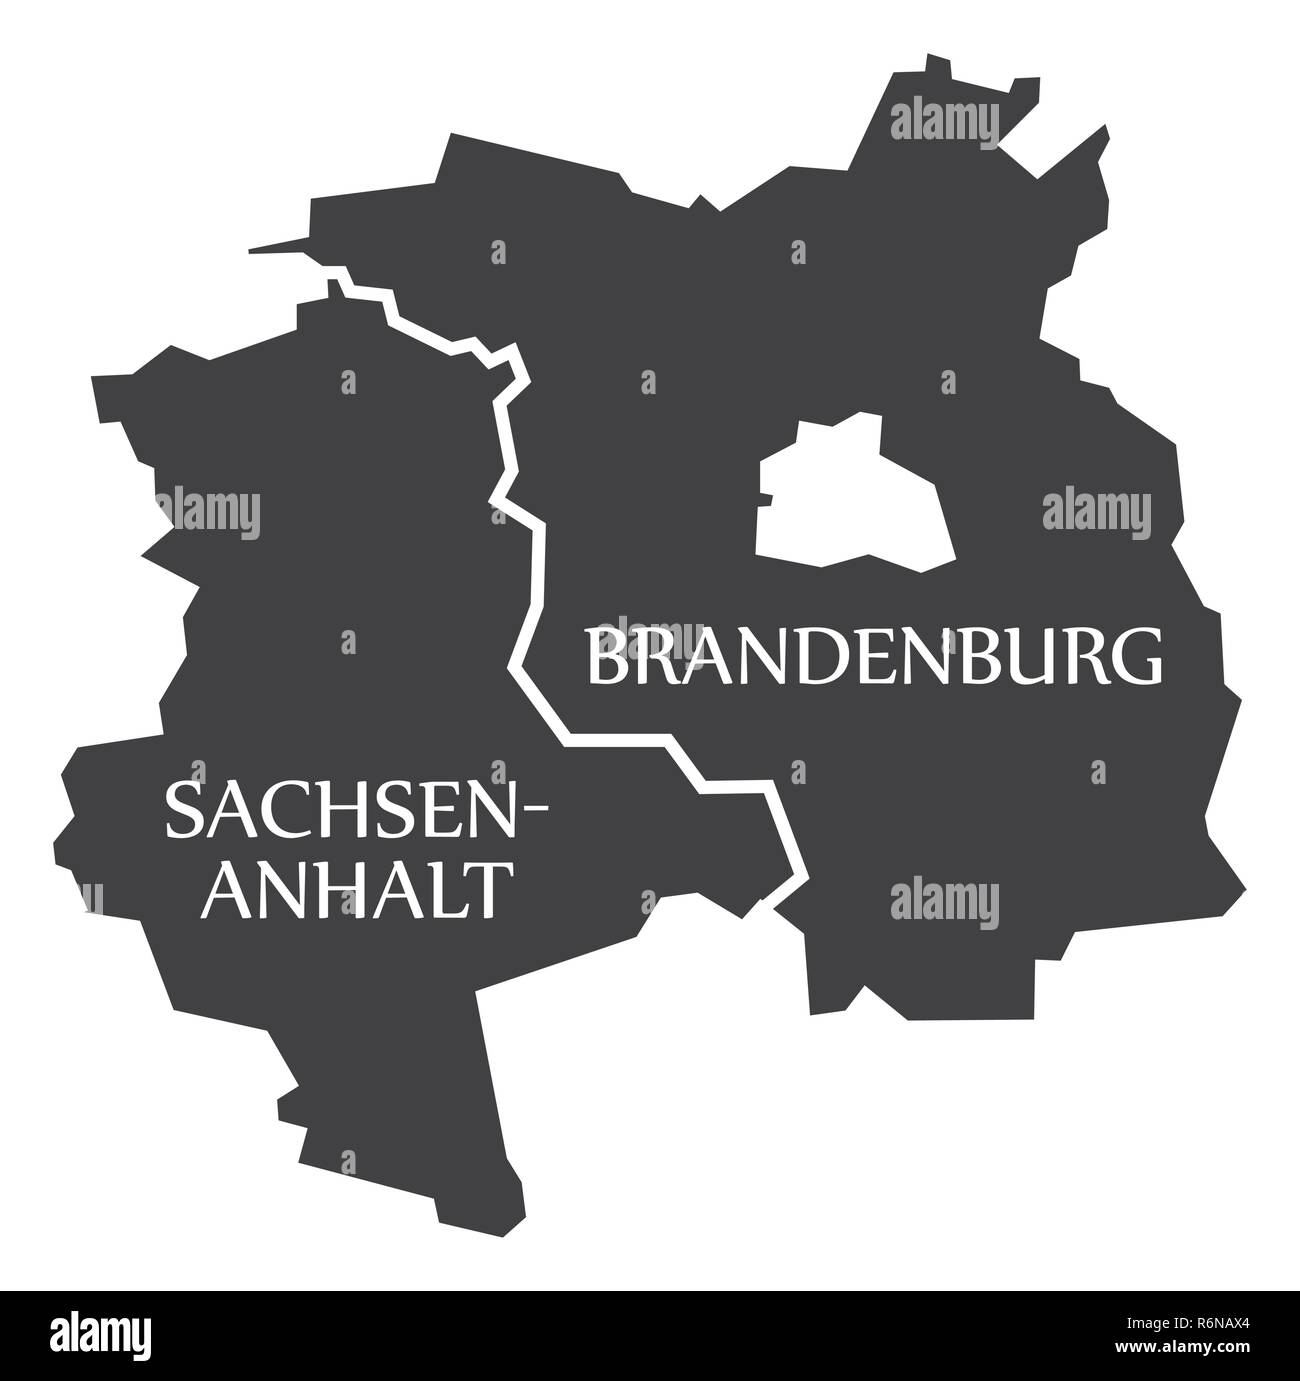 Saxony Anhalt - Brandenburg federal states map of Germany black with titles Stock Vector